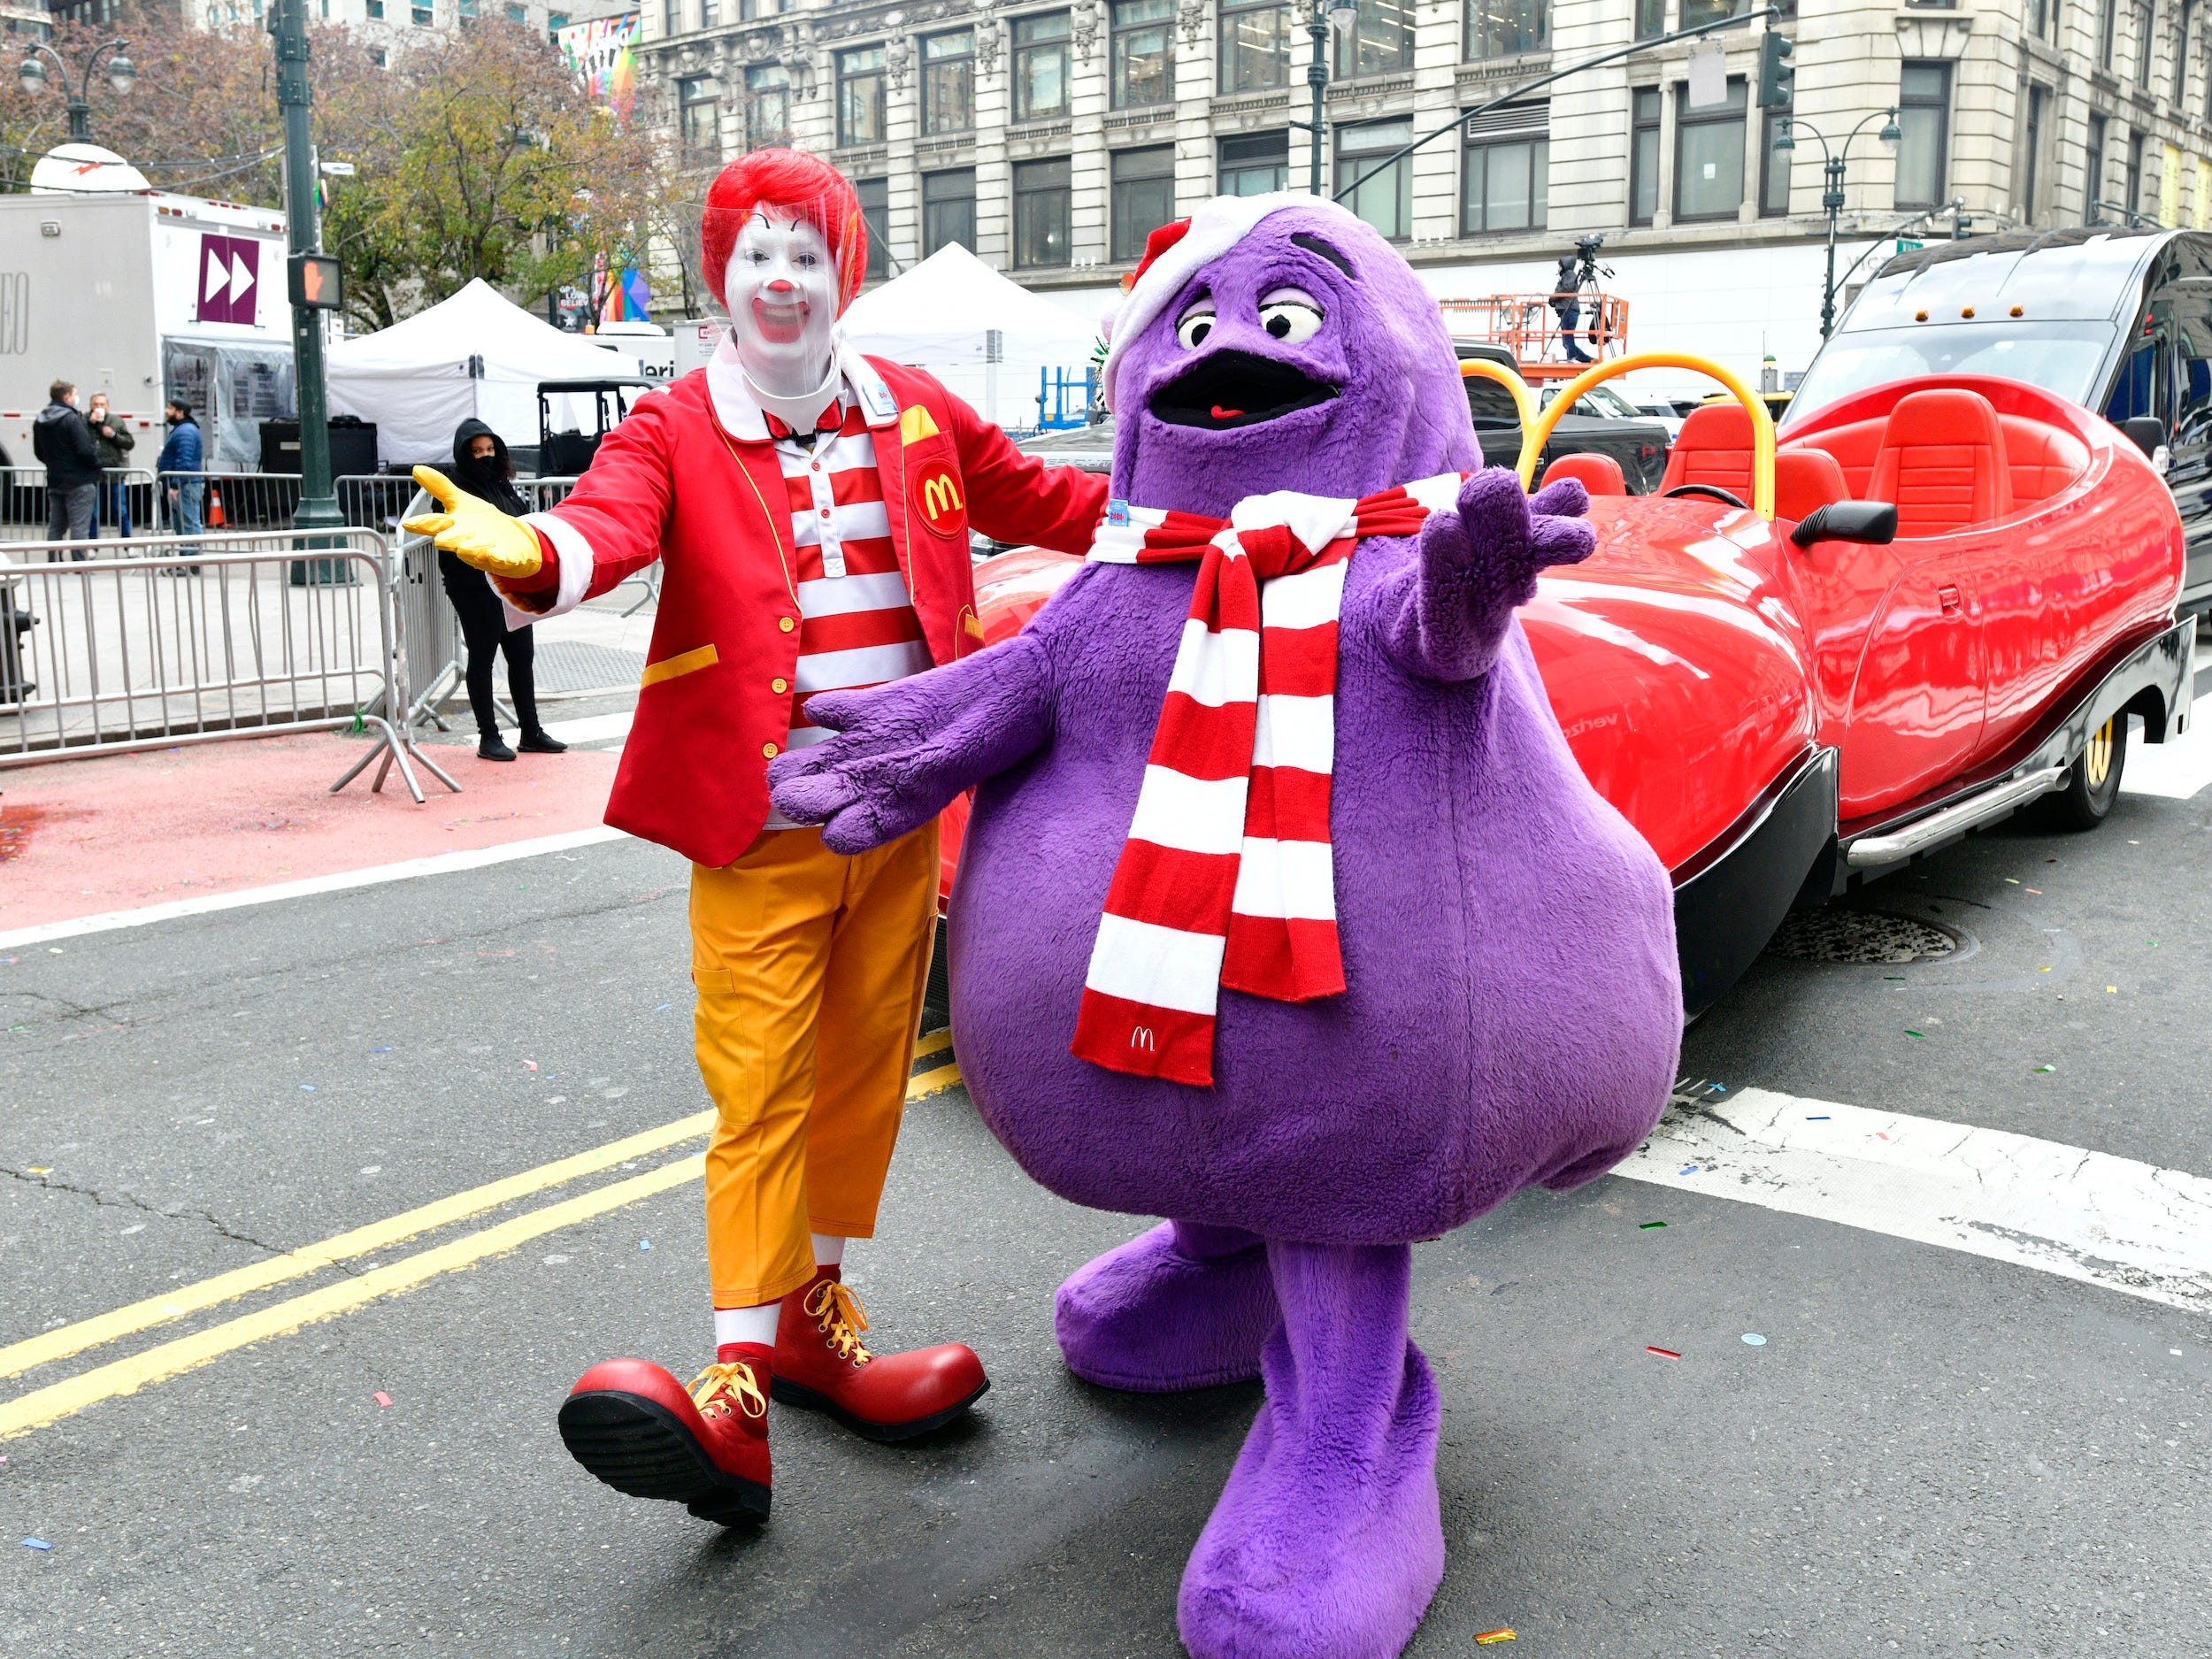 Ronald McDonald and Grimace with arms outstretched standing on street at Macy's parade